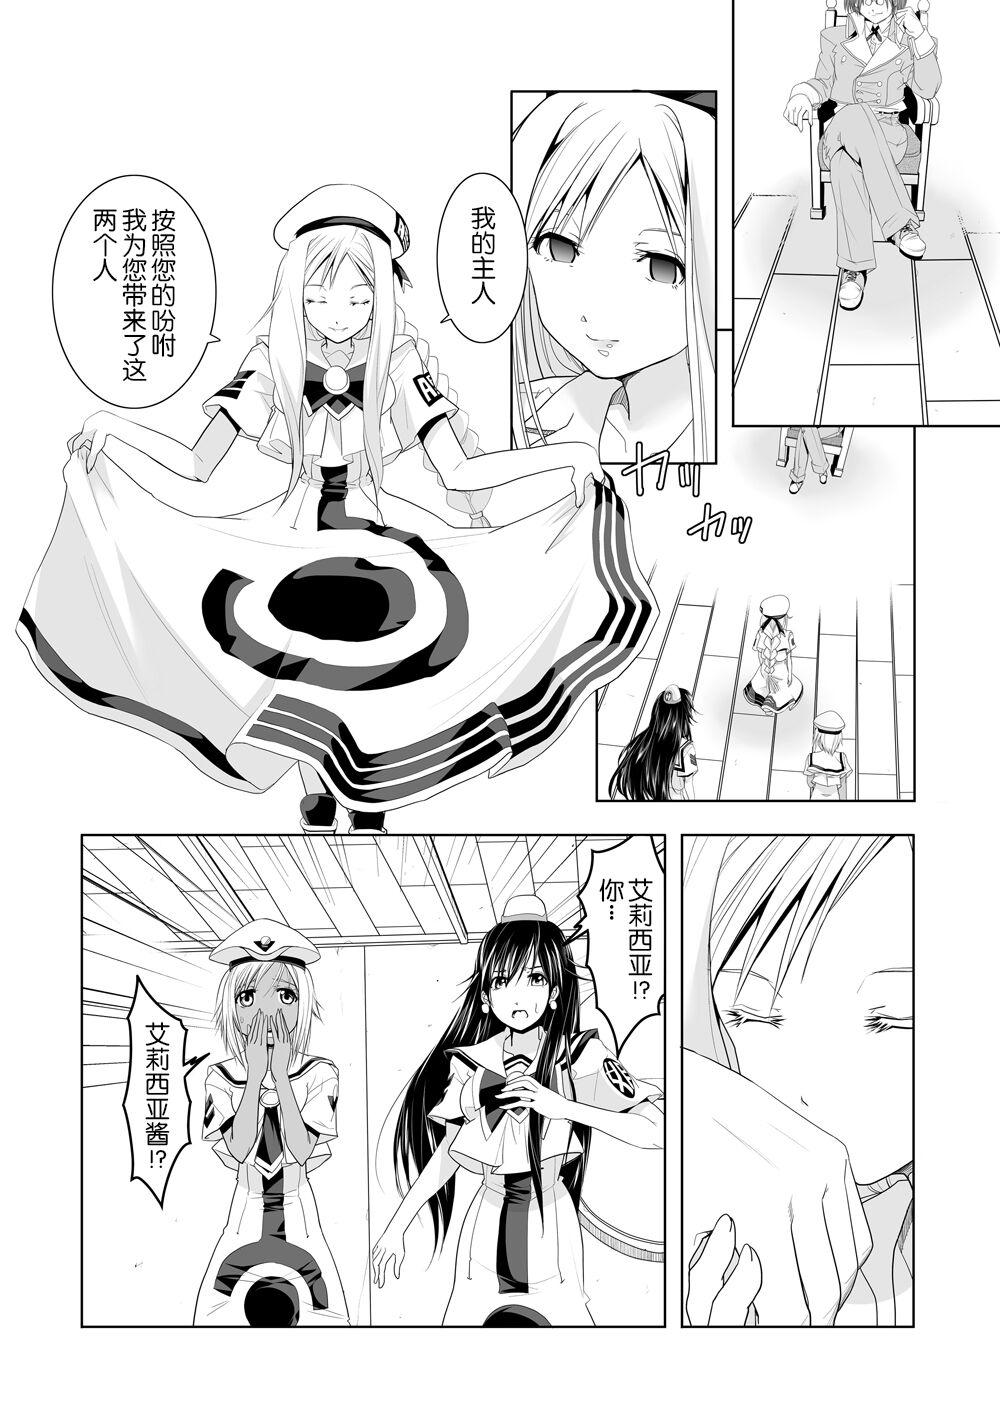 Pussyeating AR*A Mind-control Manga - Aria Mofos - Page 6